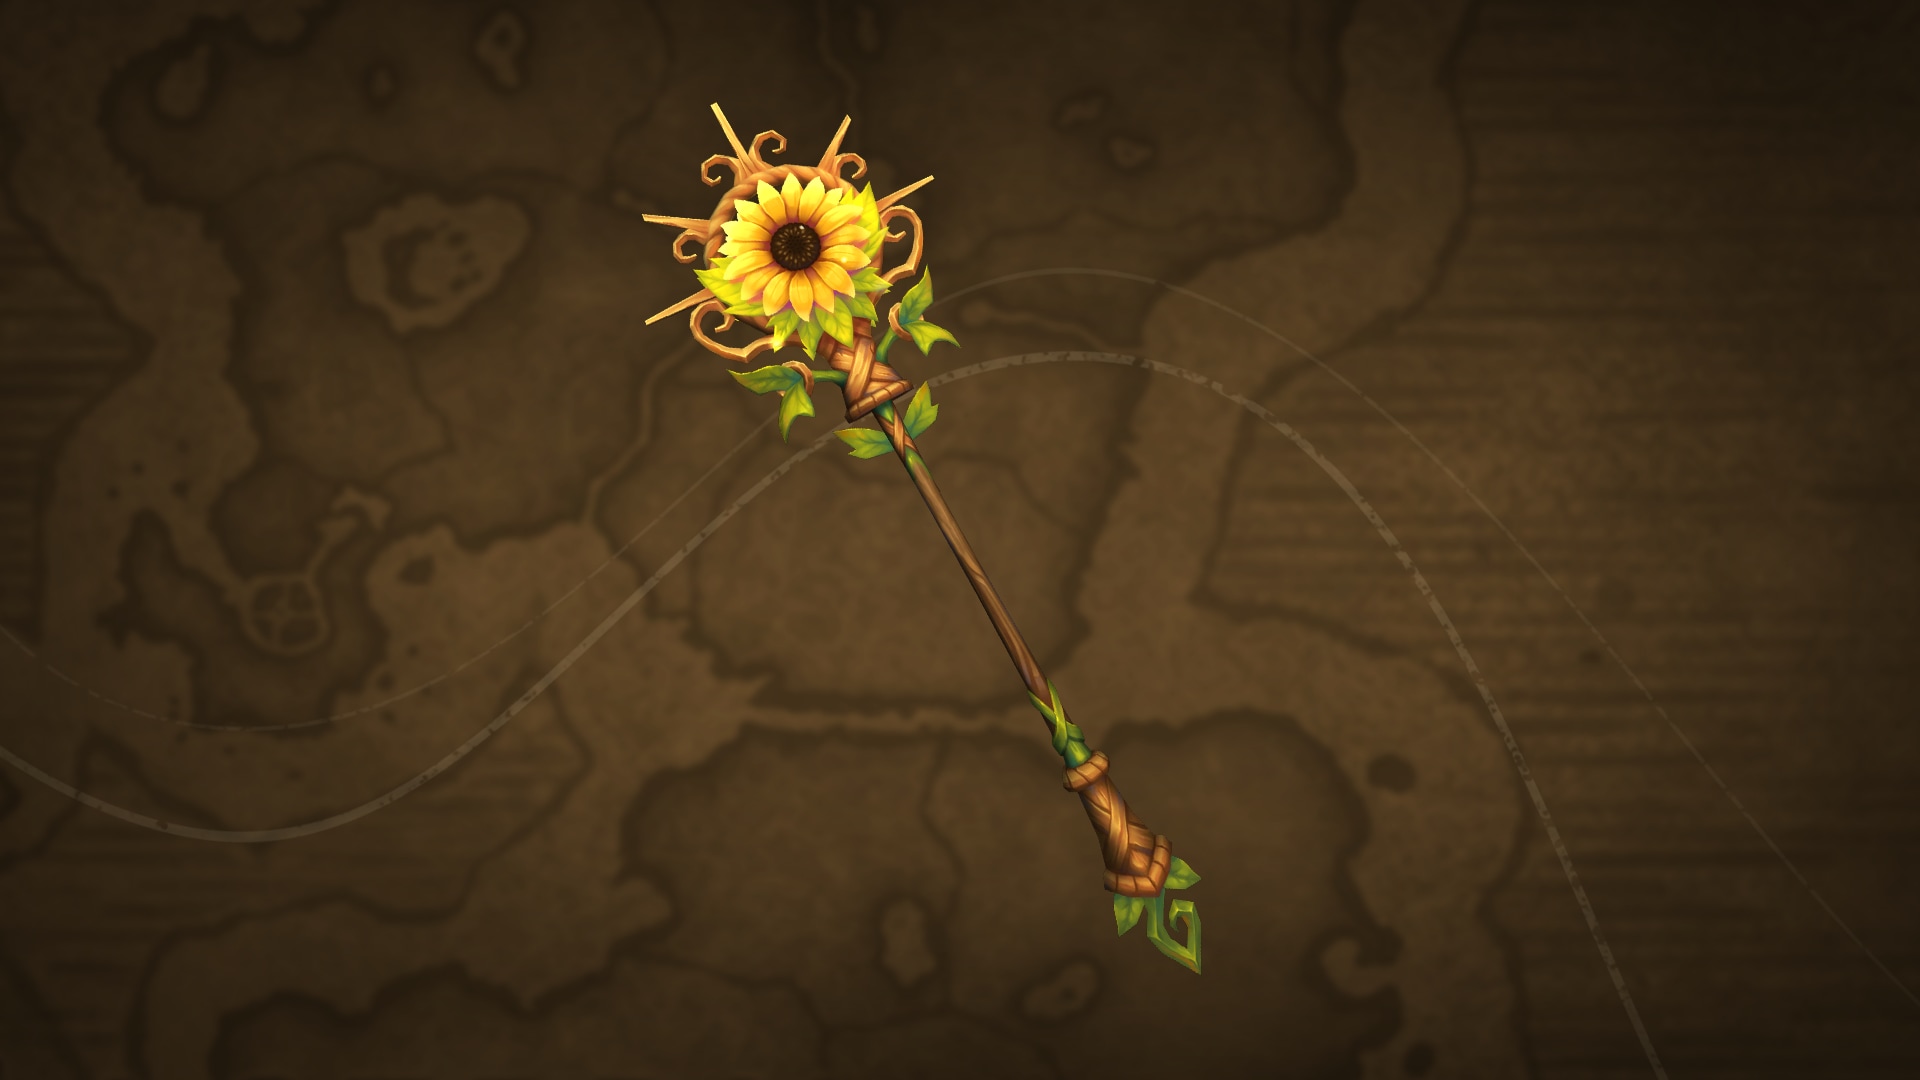 Nature-inspired staff with a sunflower at the top